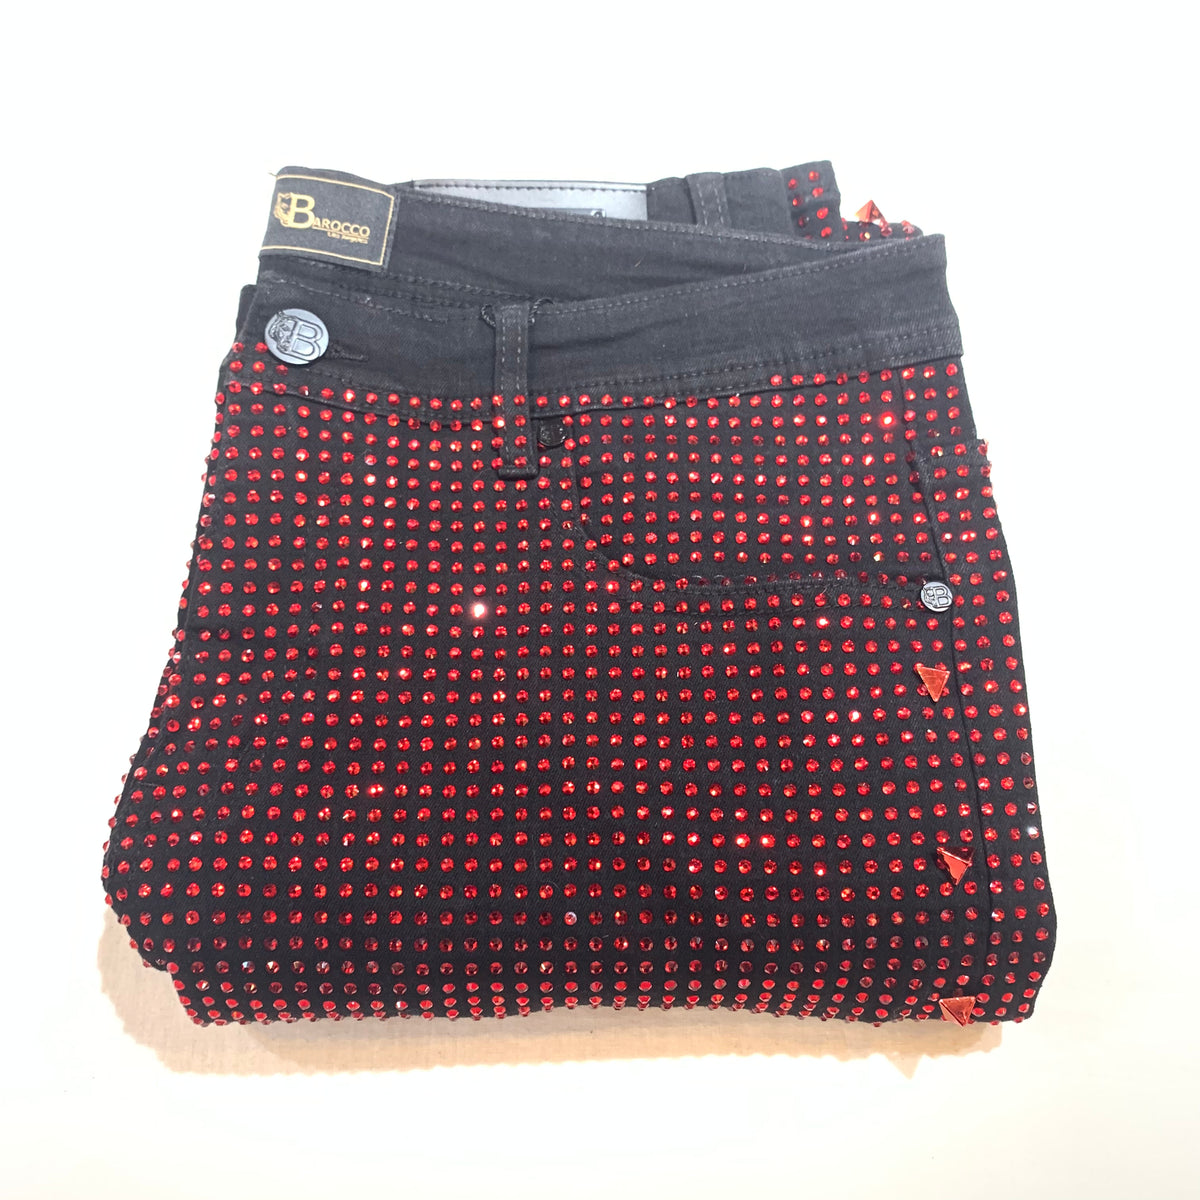 Barocco Black Fully Loaded Red Crystal Spiked Jeans - Dudes Boutique